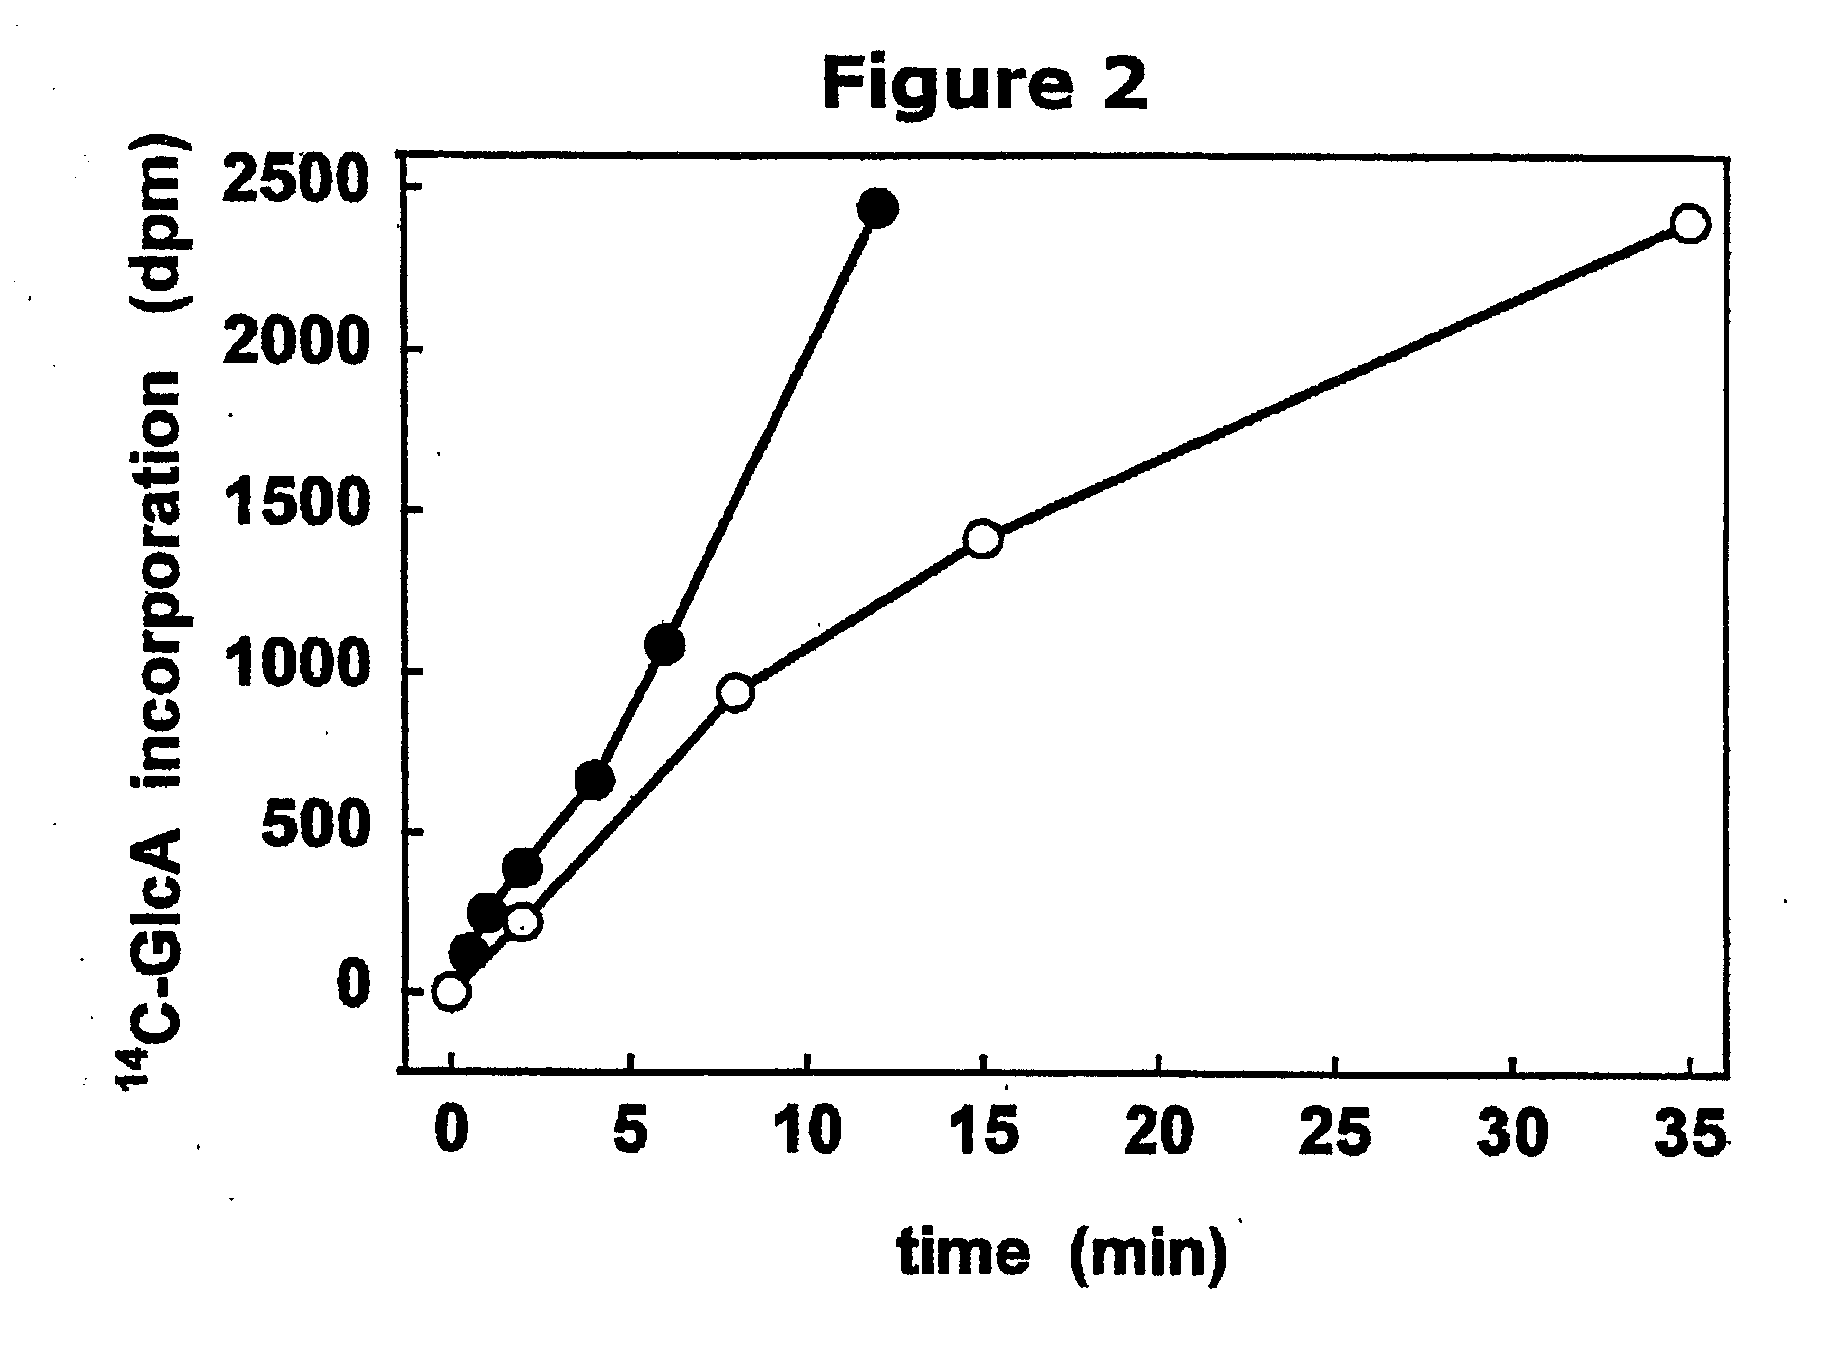 Natural, chimeric and hybrid glycosaminoglycan polymers and methods of making and using same